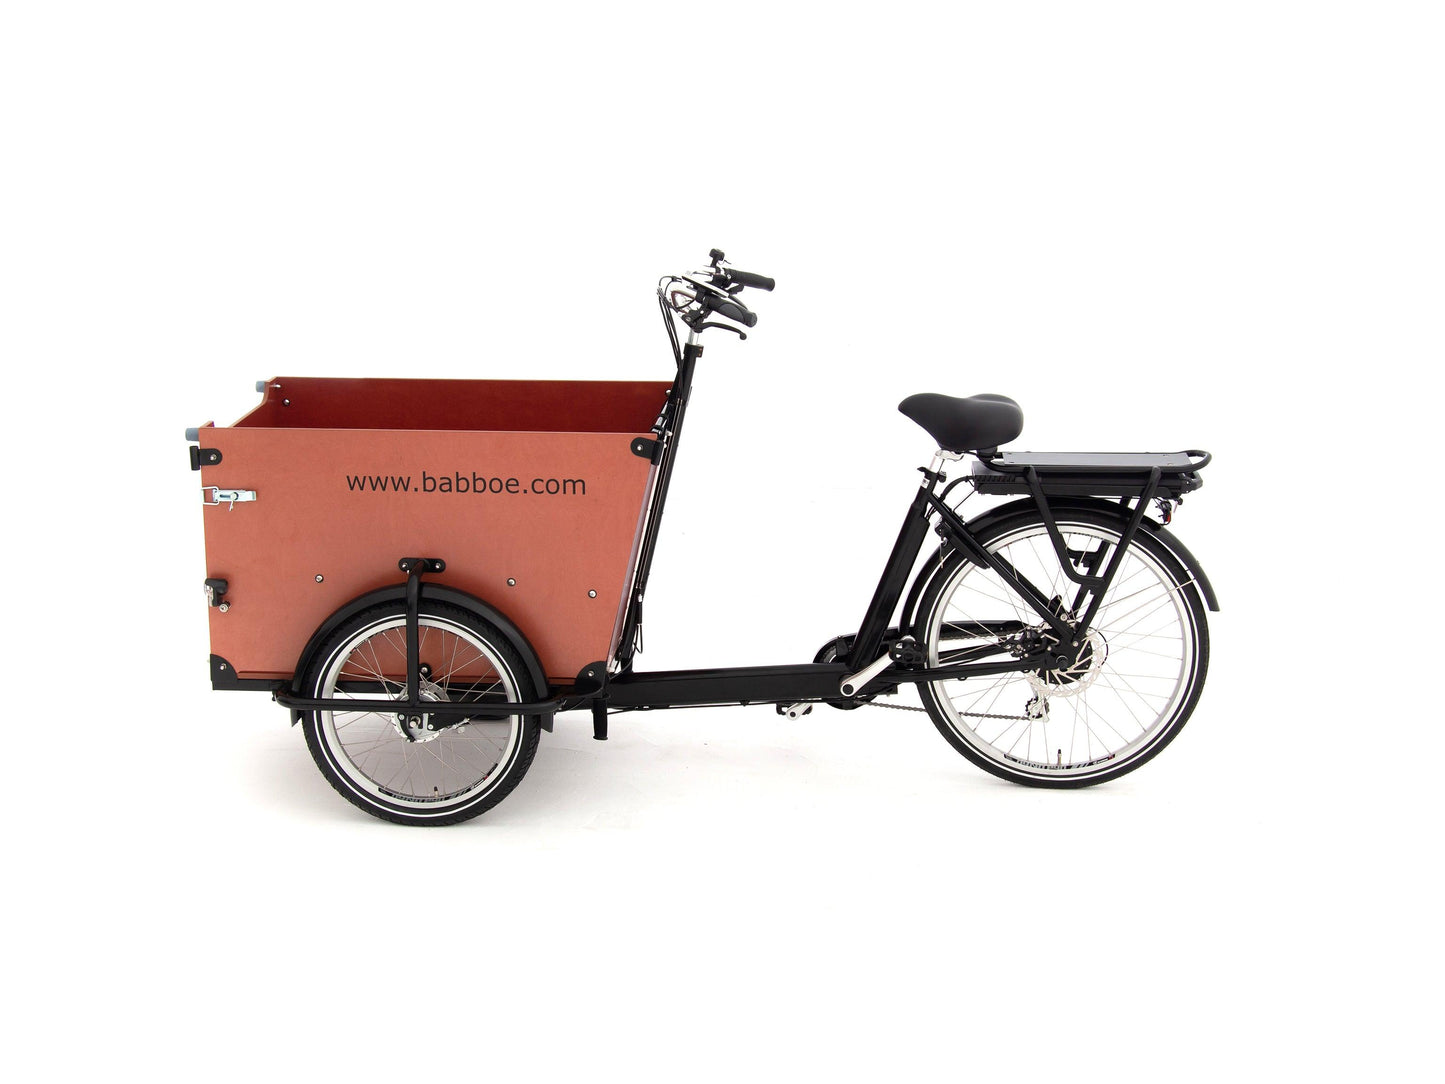 BABBOE Dog E 500Wh Electric Cargo Bike - Available now - Bike Boom